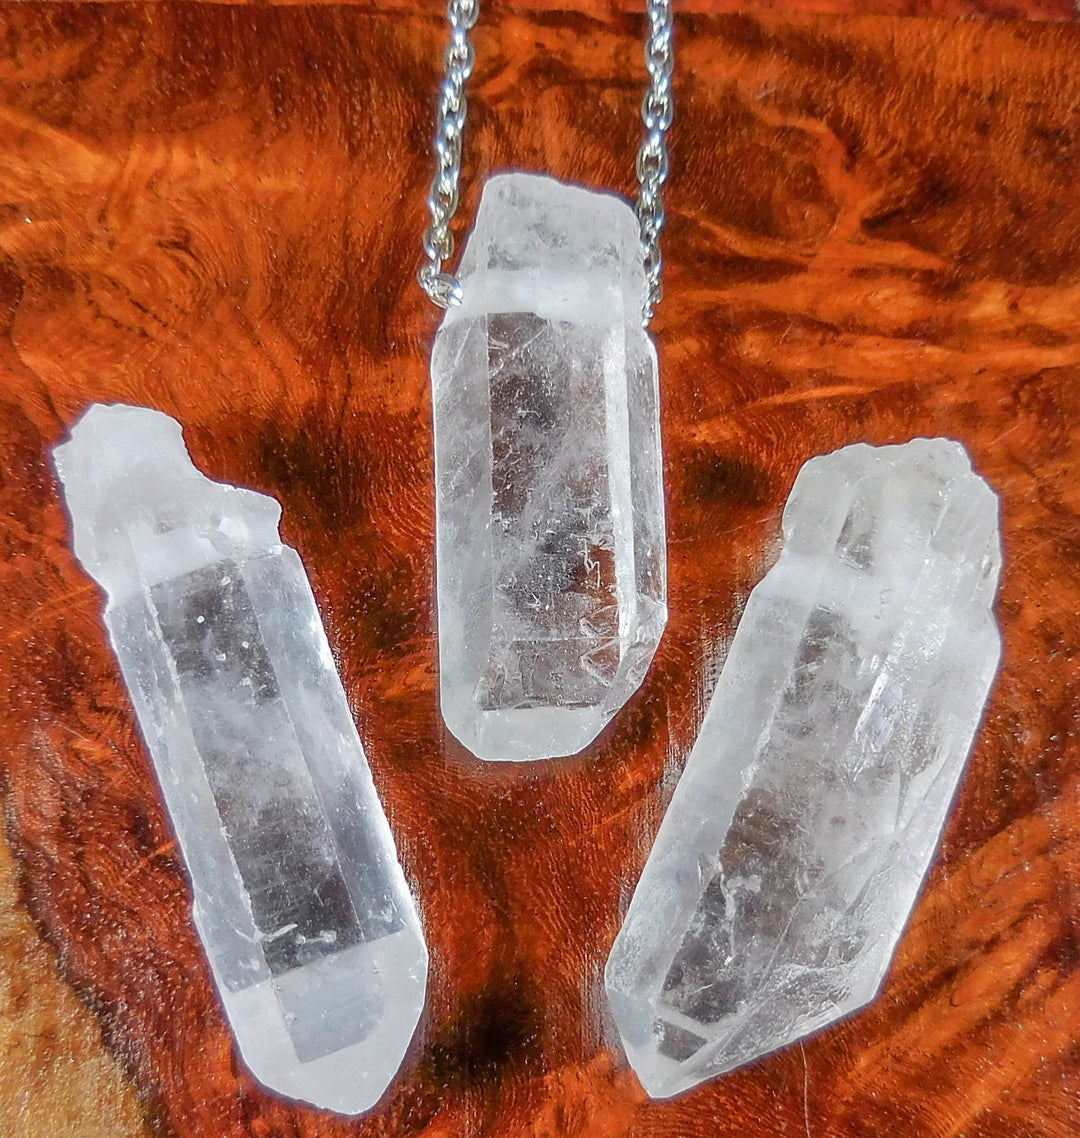 Drilled Quartz Crystal Point Bead Pendant Necklace Charm Natural Stone Jewelry CR1 Healing Crystals Stones